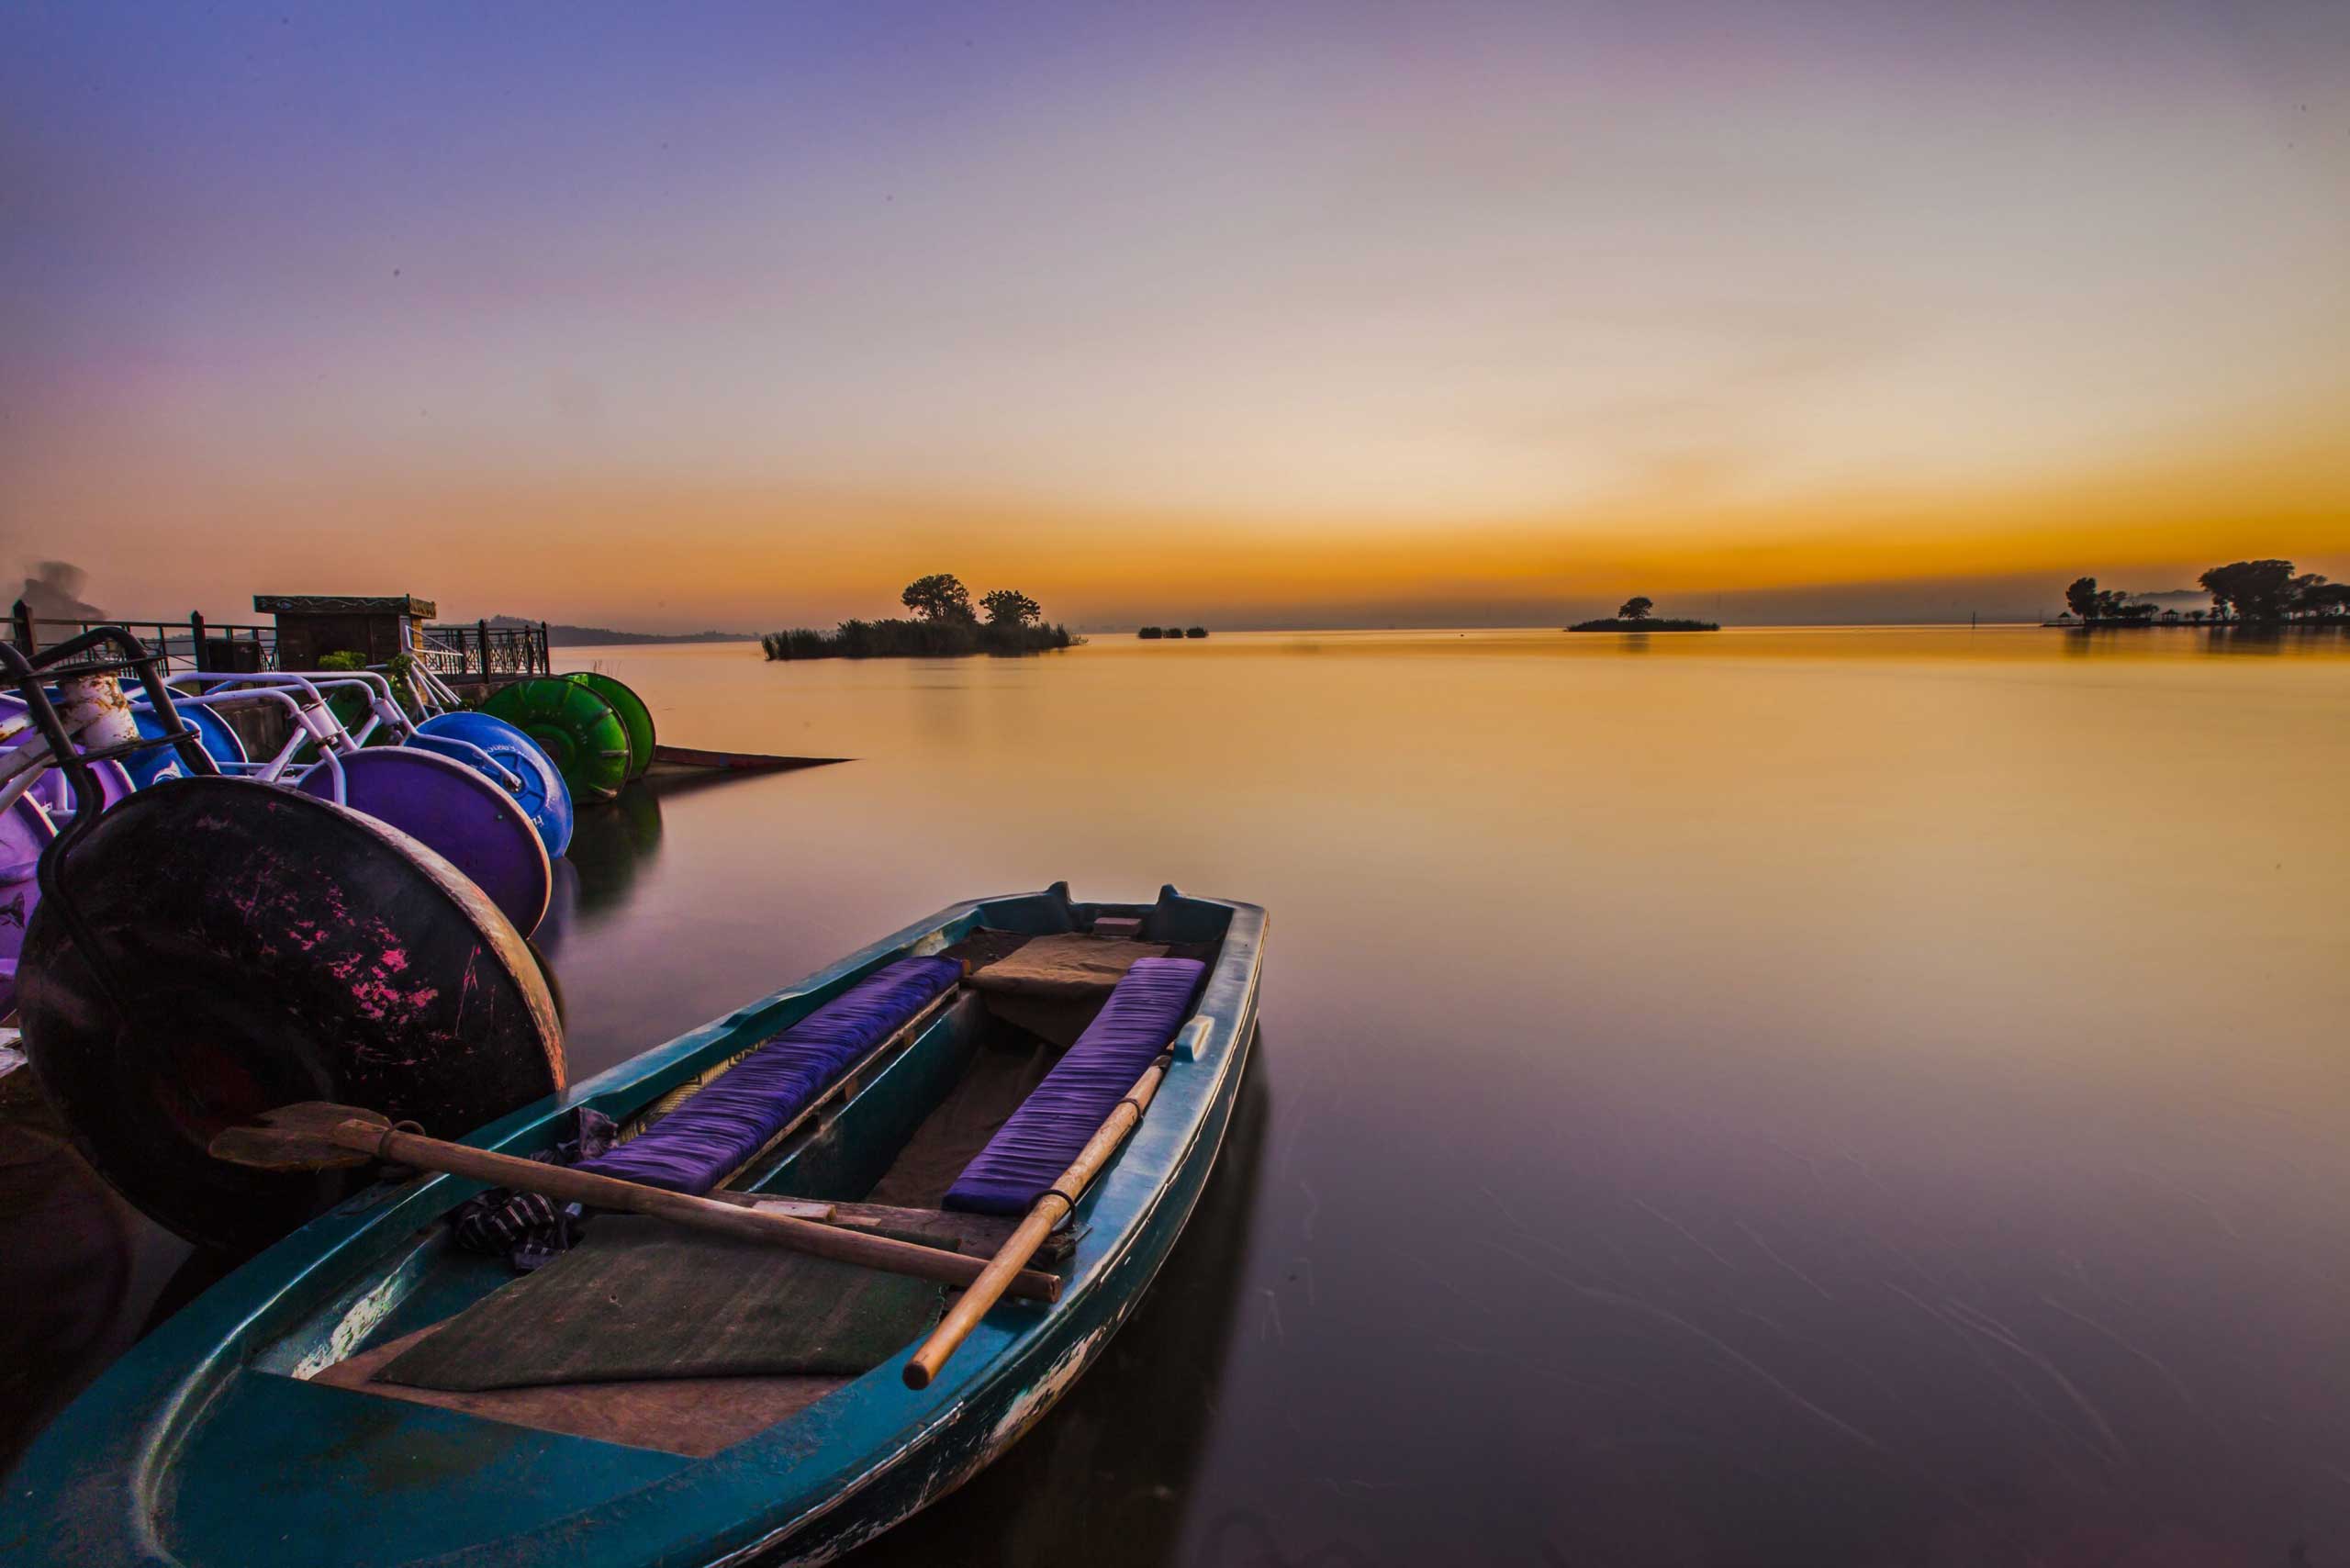 Nov. 12, 2014. A long exposure shot shows boats fastened at the Lake View picnic point as the sun sets in Islamabad, Pakistan.